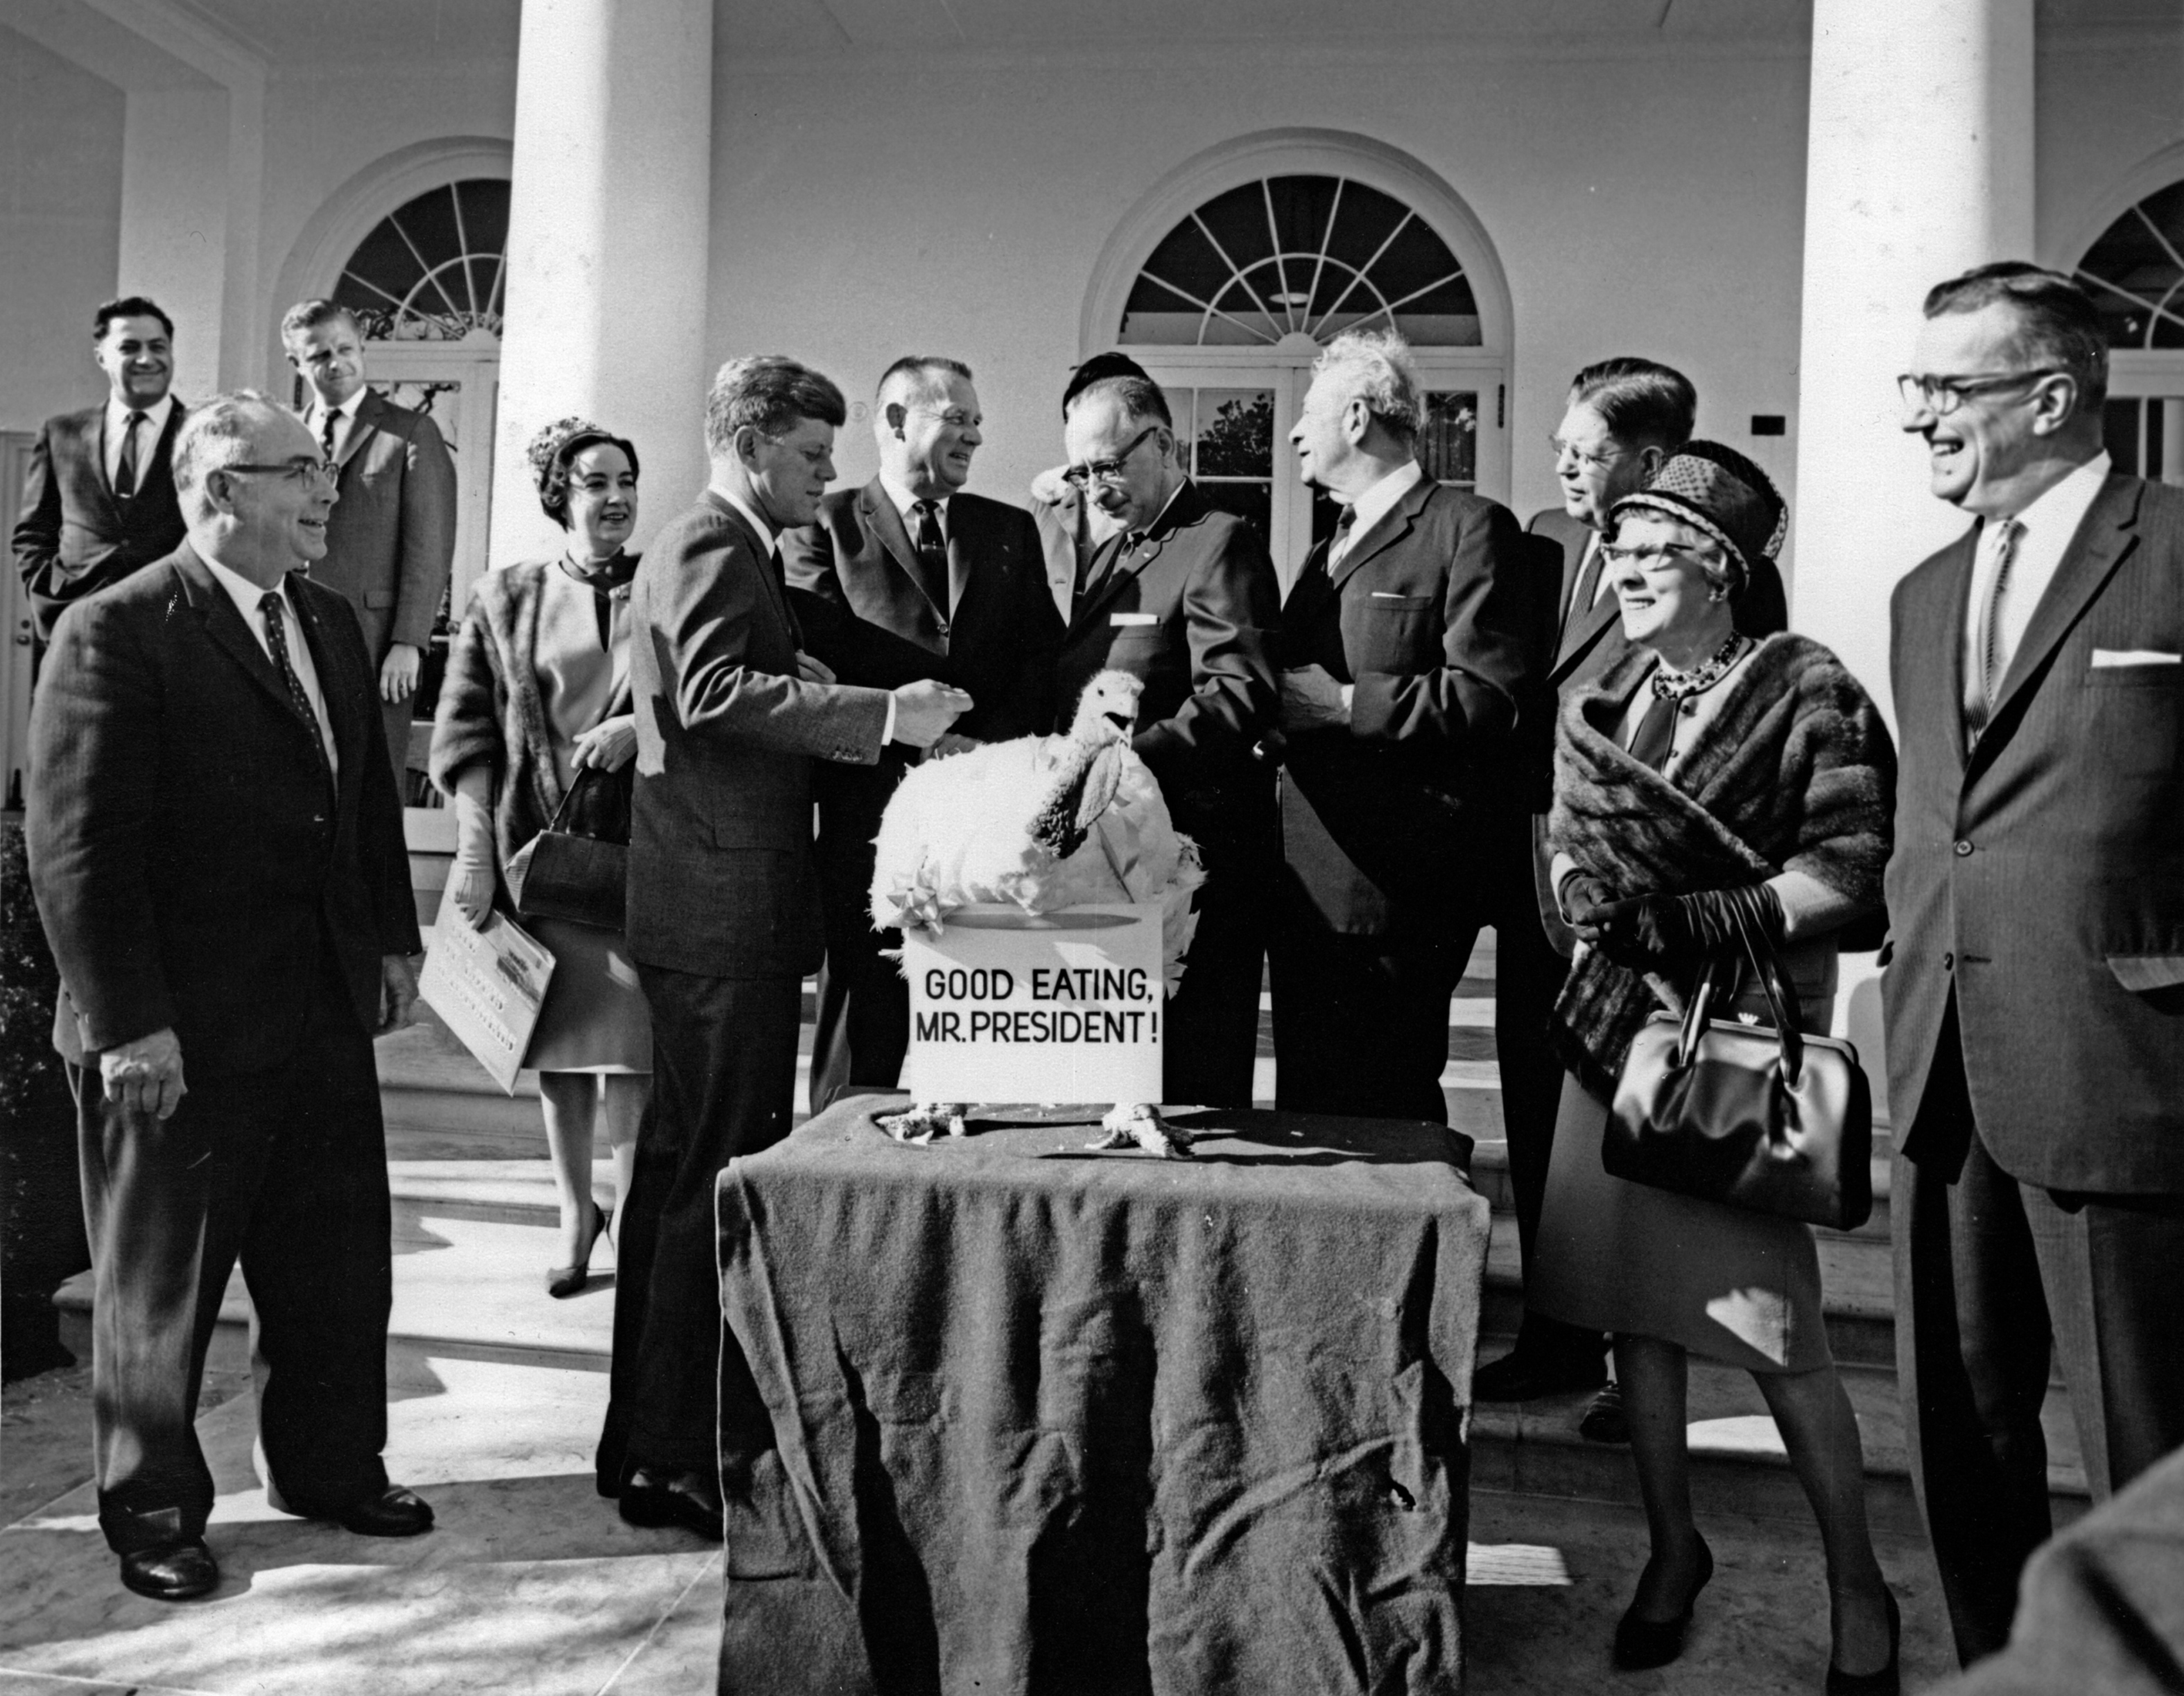 A Presidential History of Thanksgiving